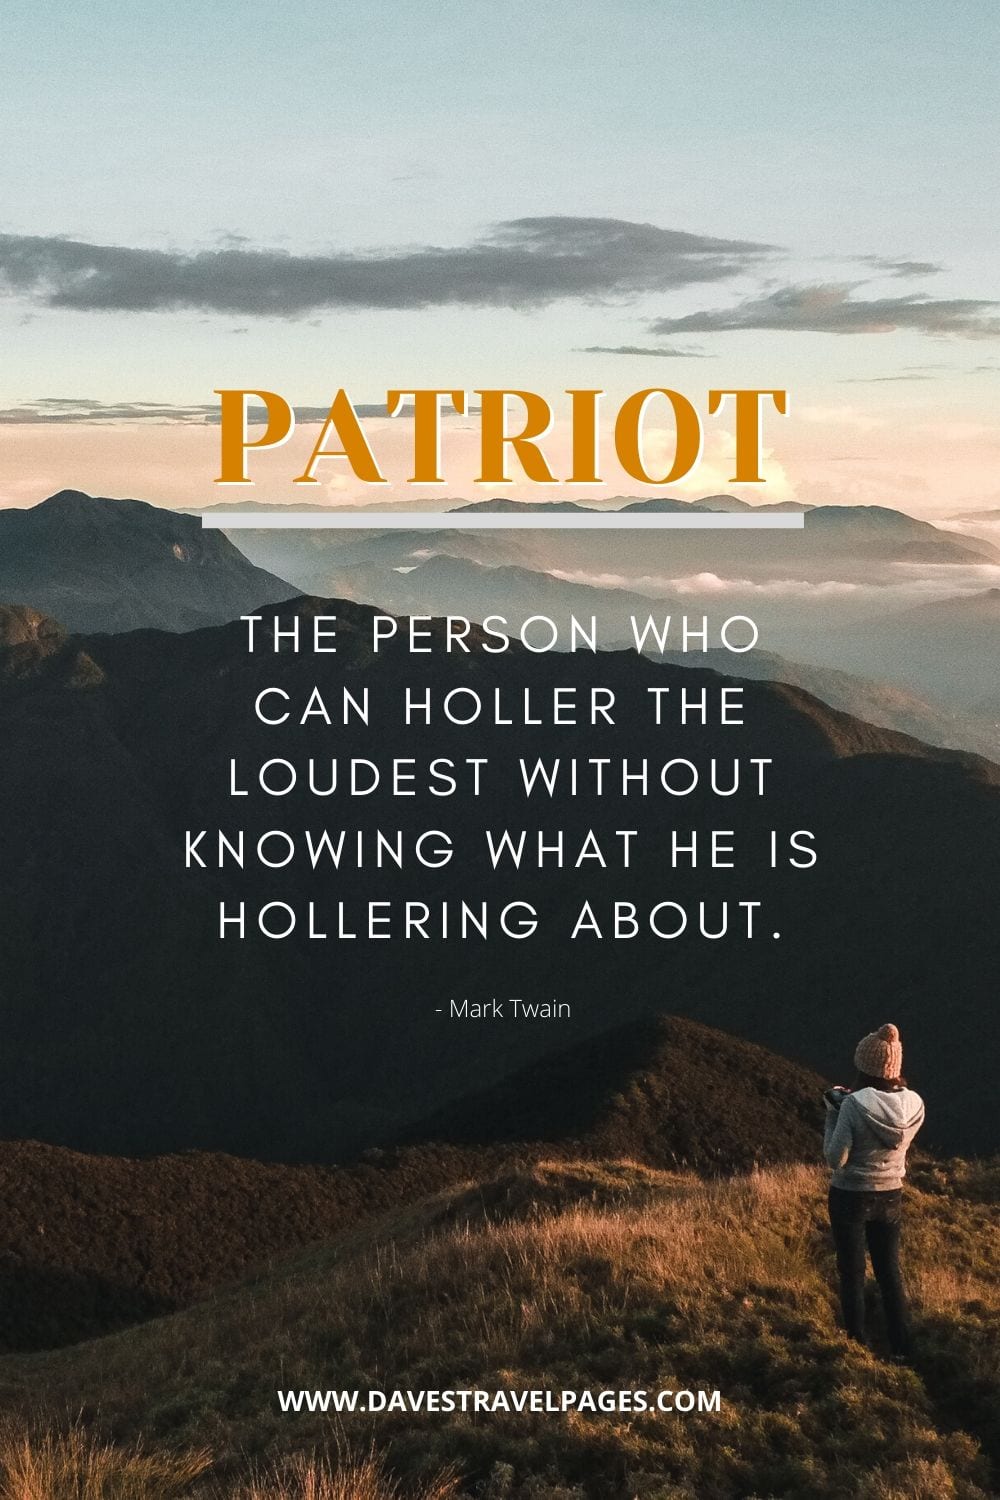 Mark Twain Quotations: Patriot: the person who can holler the loudest without knowing what he is hollering about.